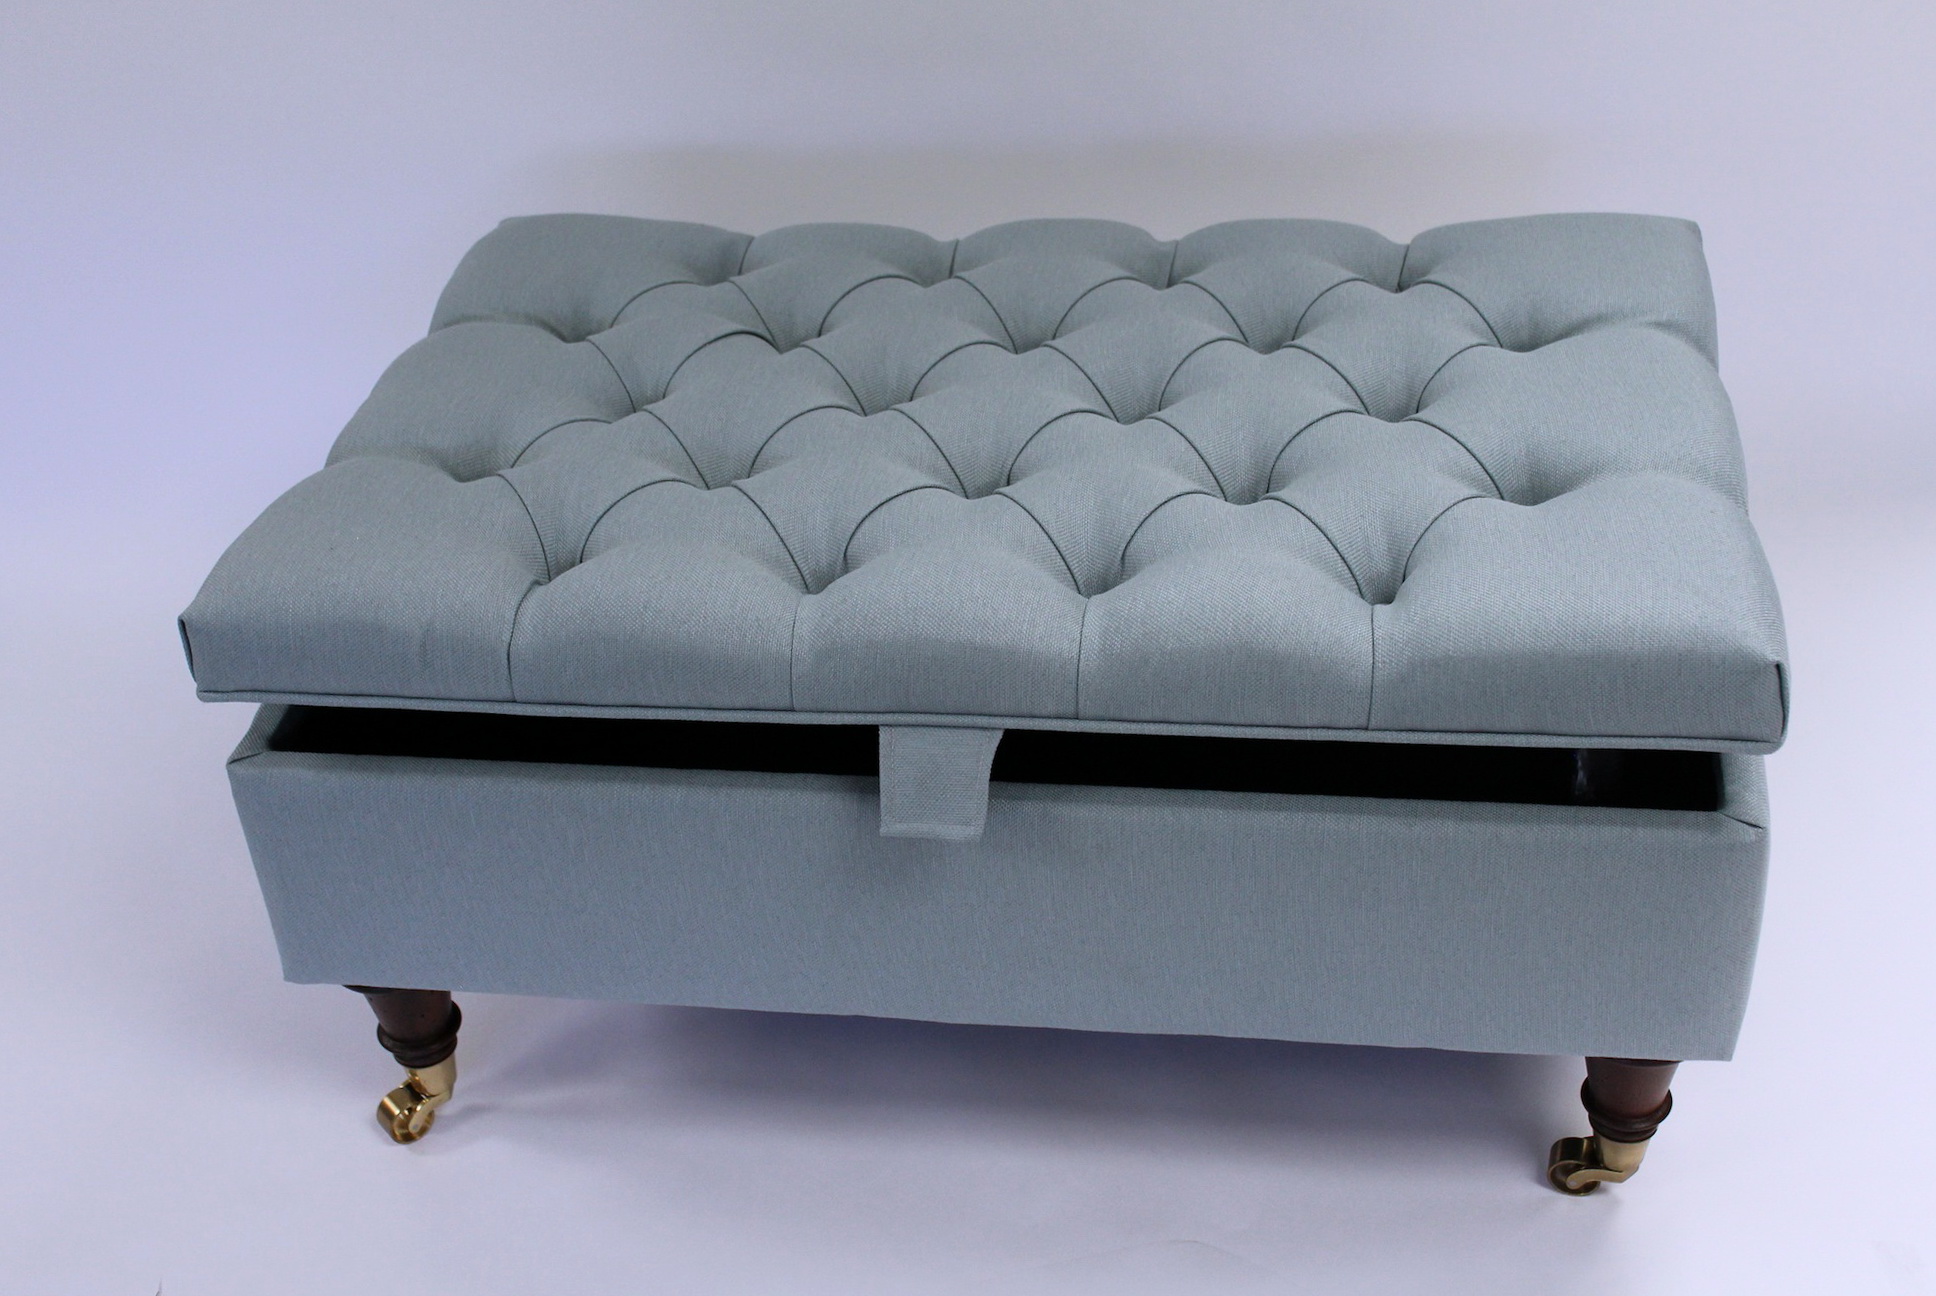 Upholstered Ottoman Coffee Table Uk | Home Design Ideas